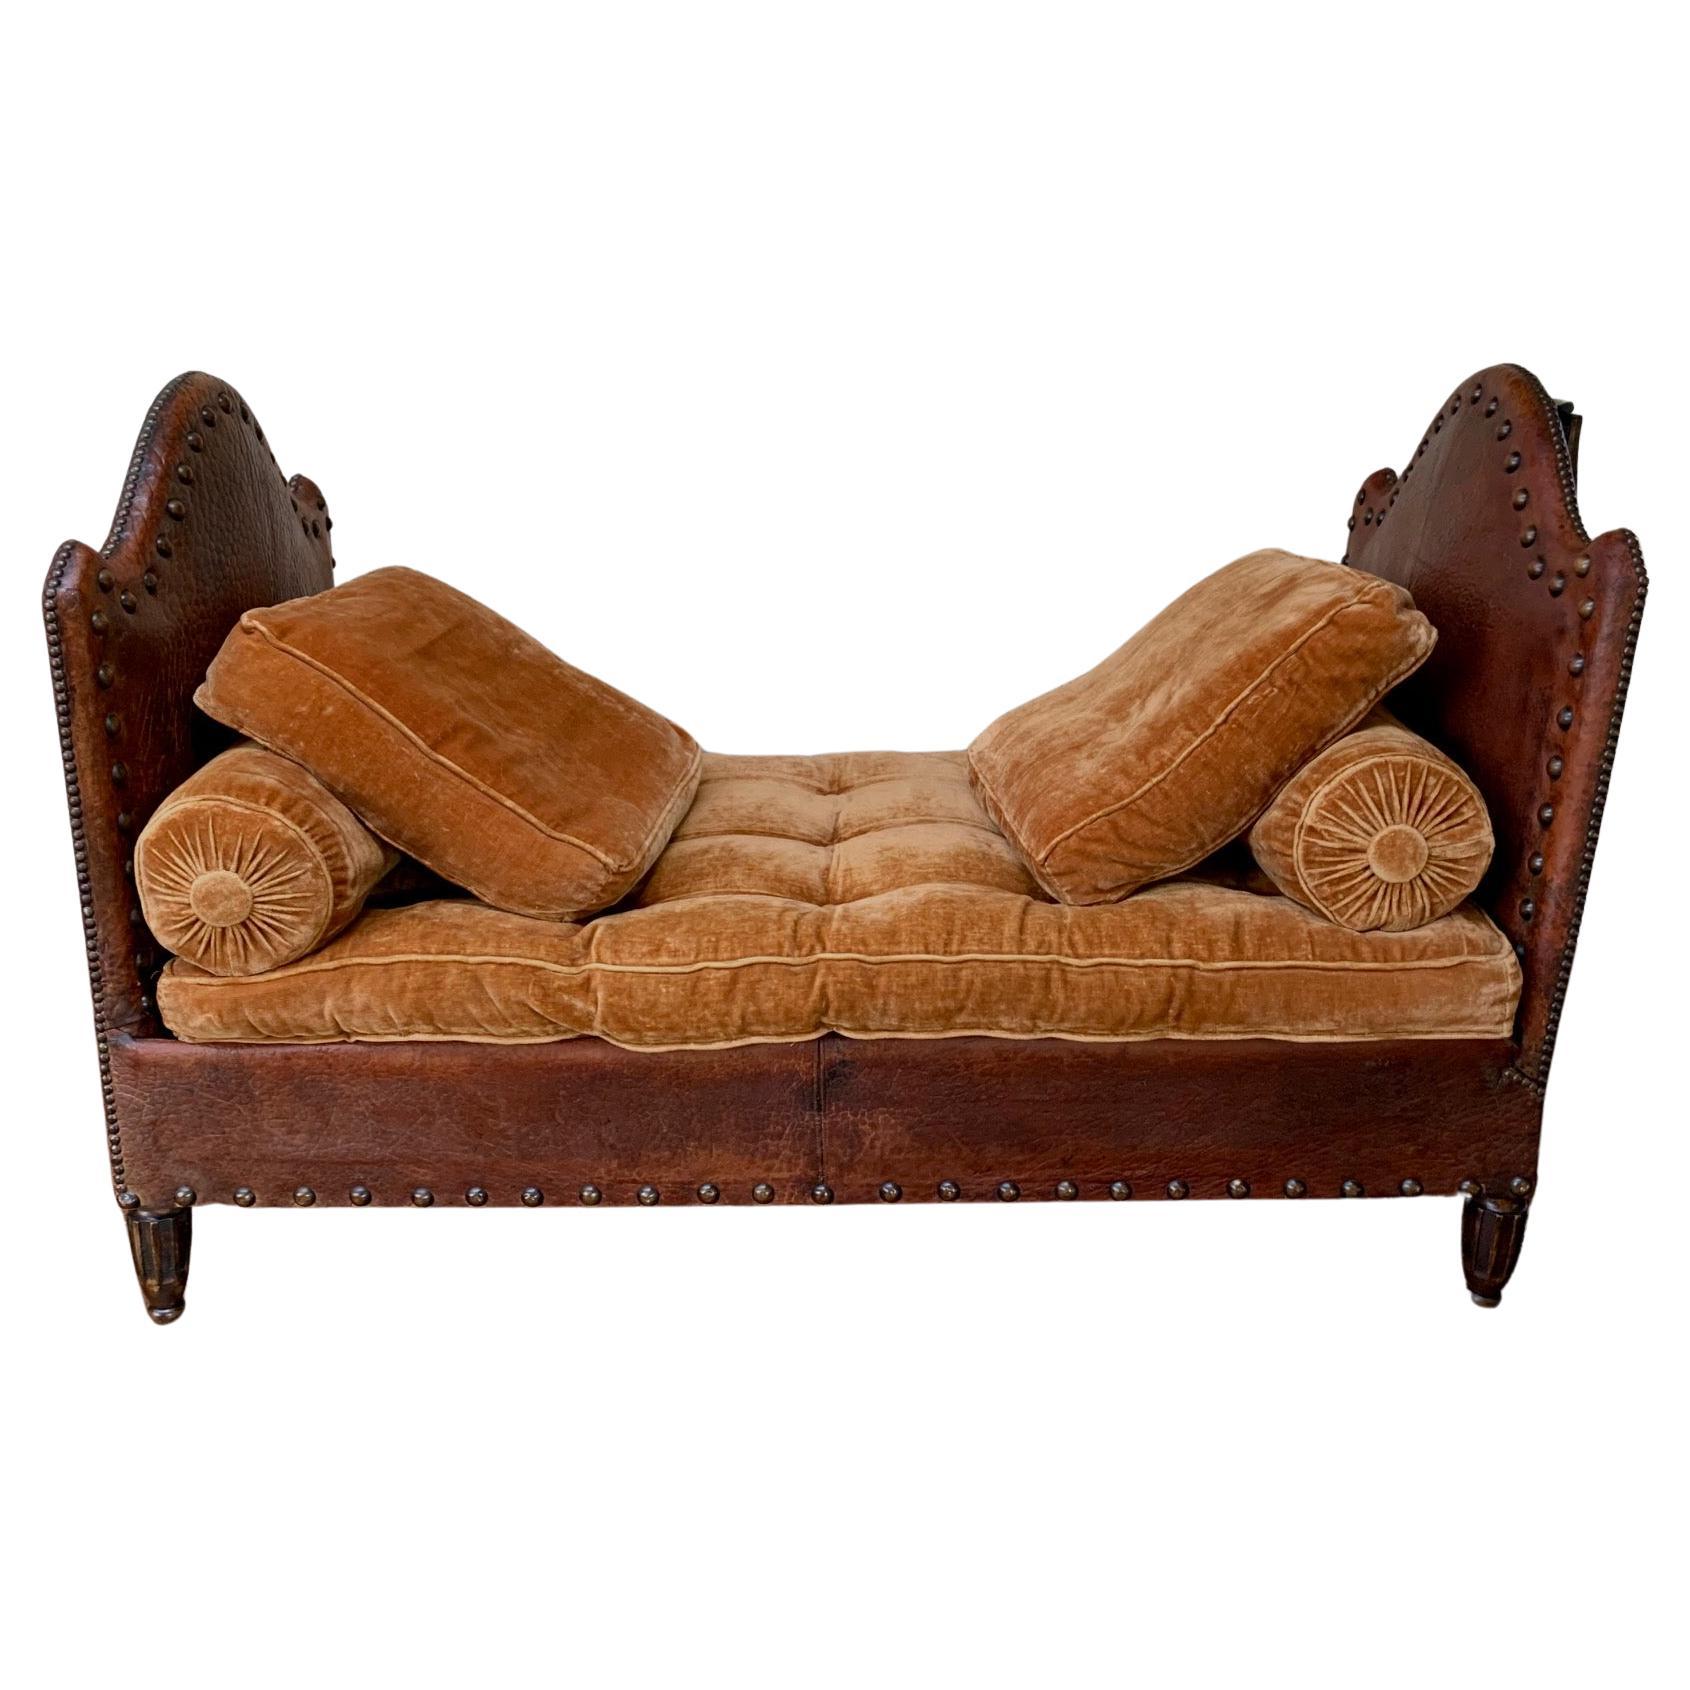 This exquisite French banquette is in the most extraordinary condition for its age. The leather is completely original and it still retains its burnt orange cotton velvet, seat cushion and matching ruched bolsters. The overall visual effect is just